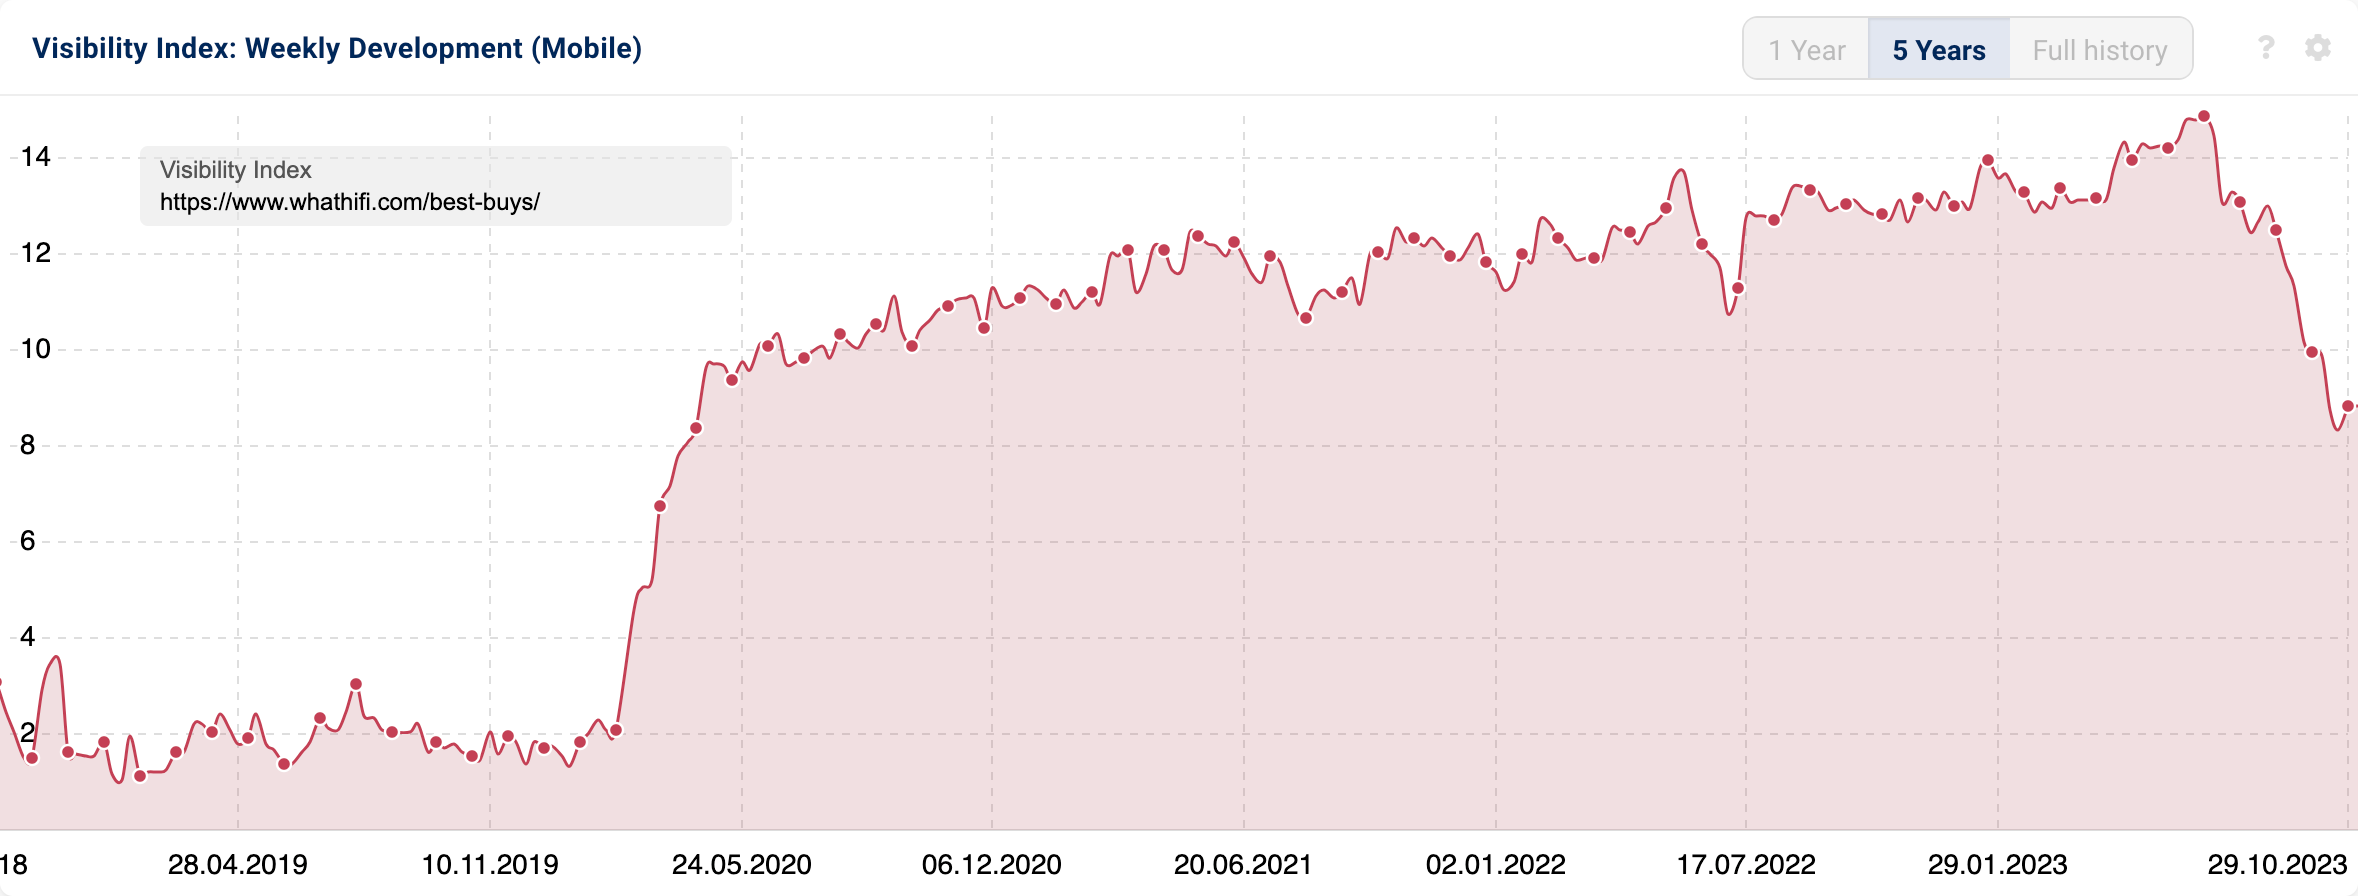 The weekly development of the SISTRIX Visibility Index for the /best-buys/ directory on whathifi.com. The graph shows a sharp rise in the beginning of 2020 after which it remains constant with a few fluctuations.  